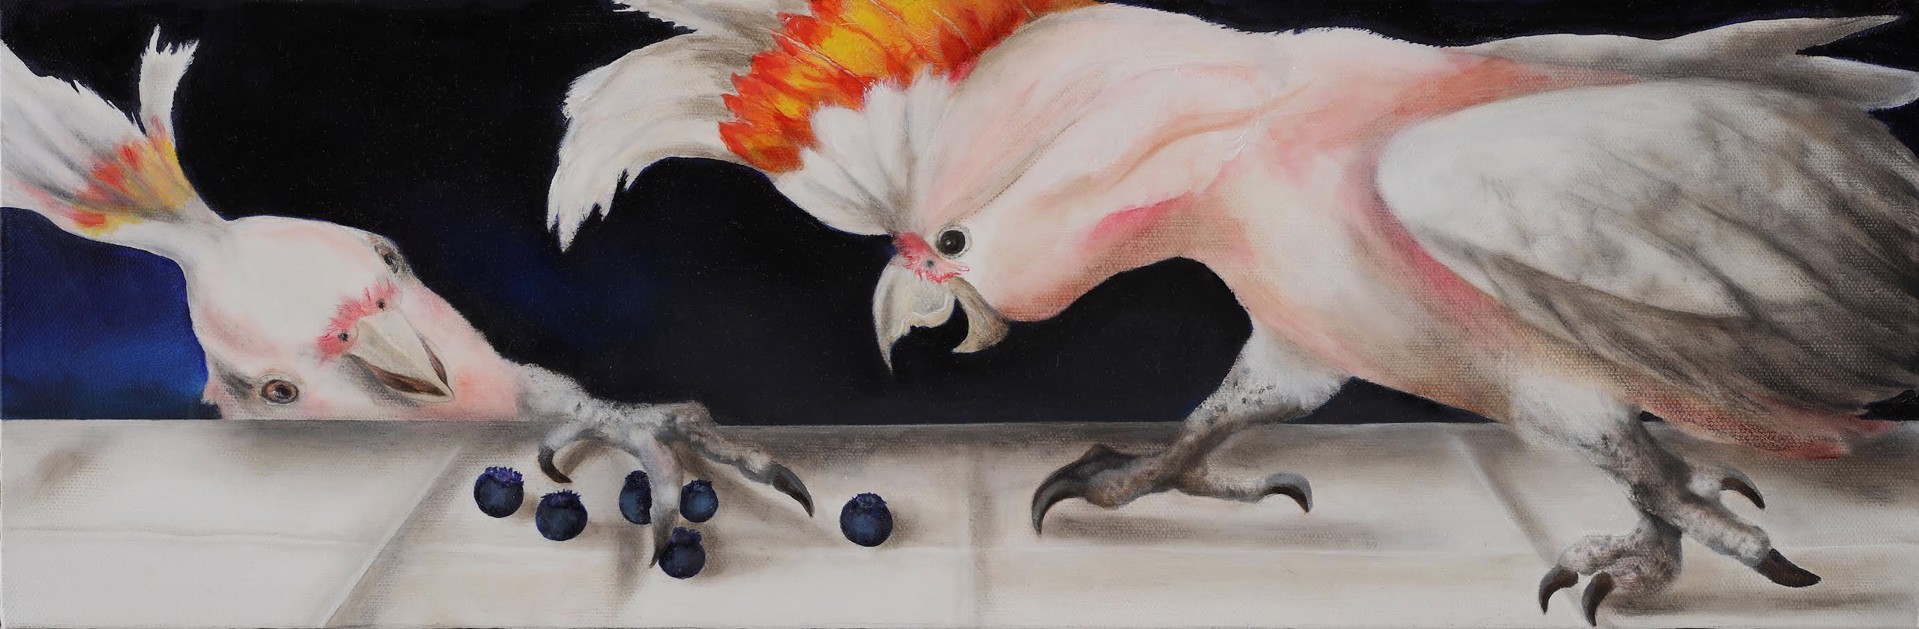 Blueberries and Cockatoos by Adrienne Sherman